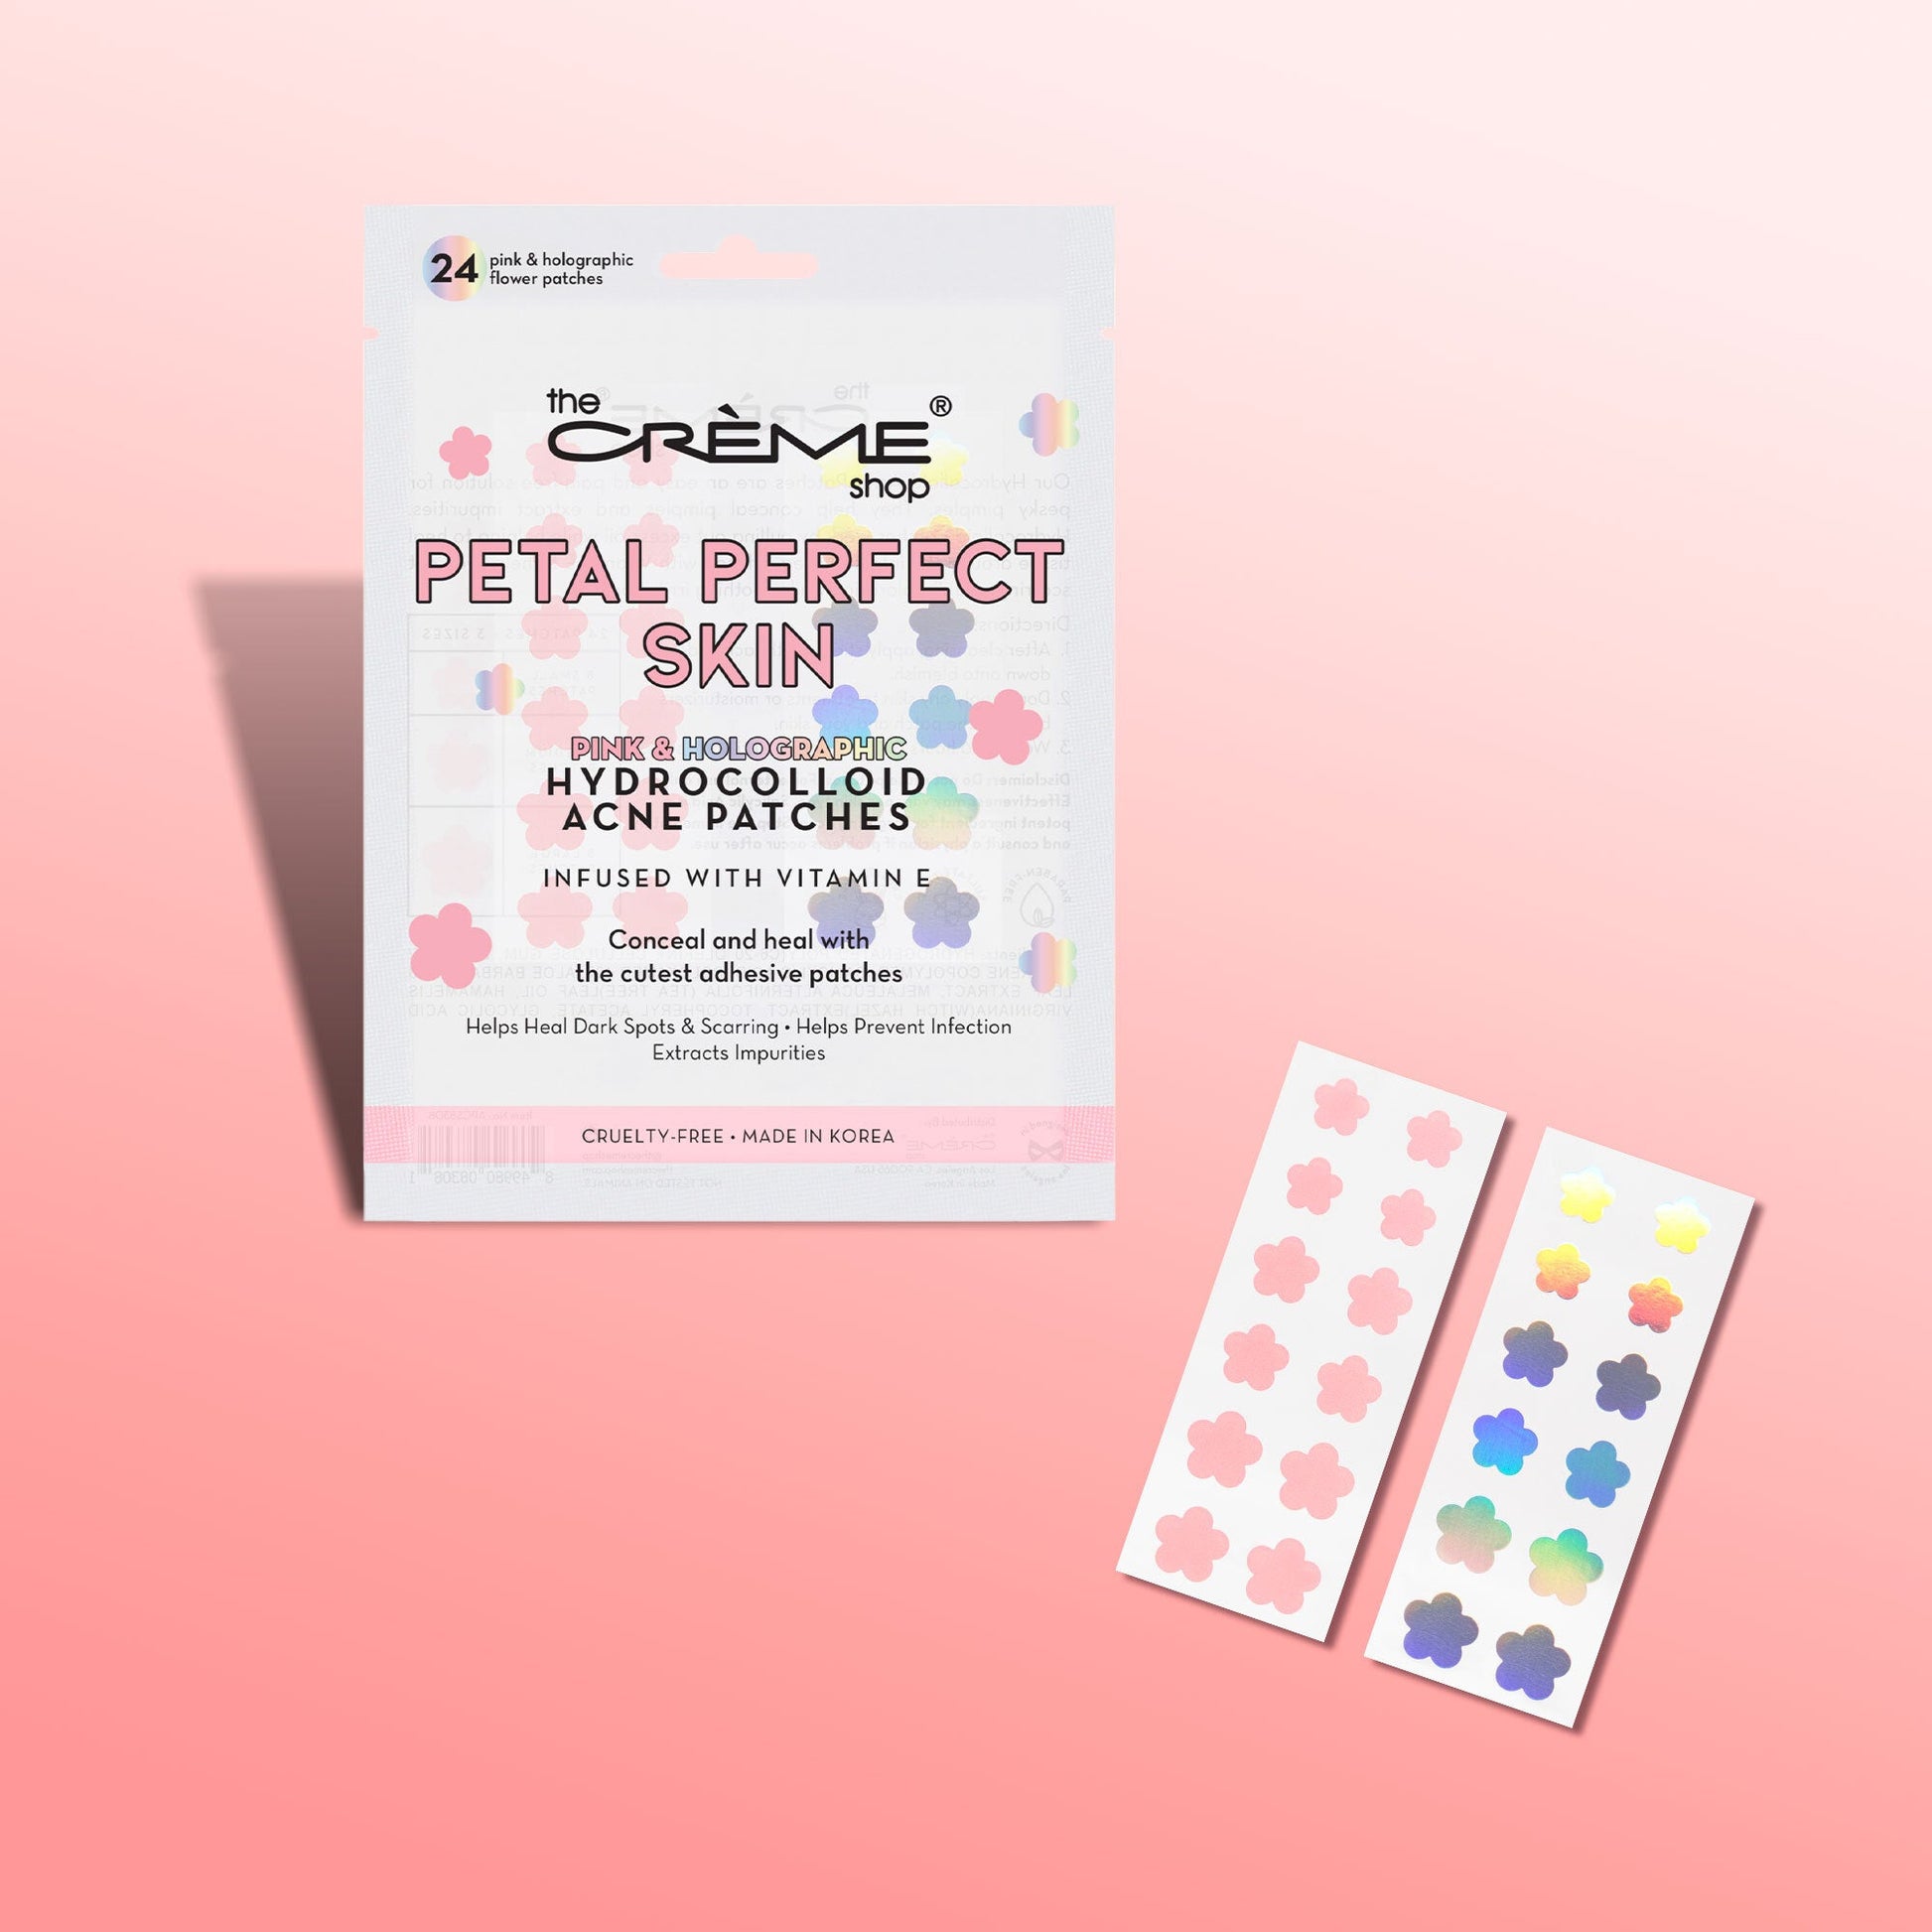 Petal Perfect Skin - Hydrocolloid Acne Patches | Pink & Holographic Hydrocolloid Acne Patches The Crème Shop 3 Pack (Save $3.00) 